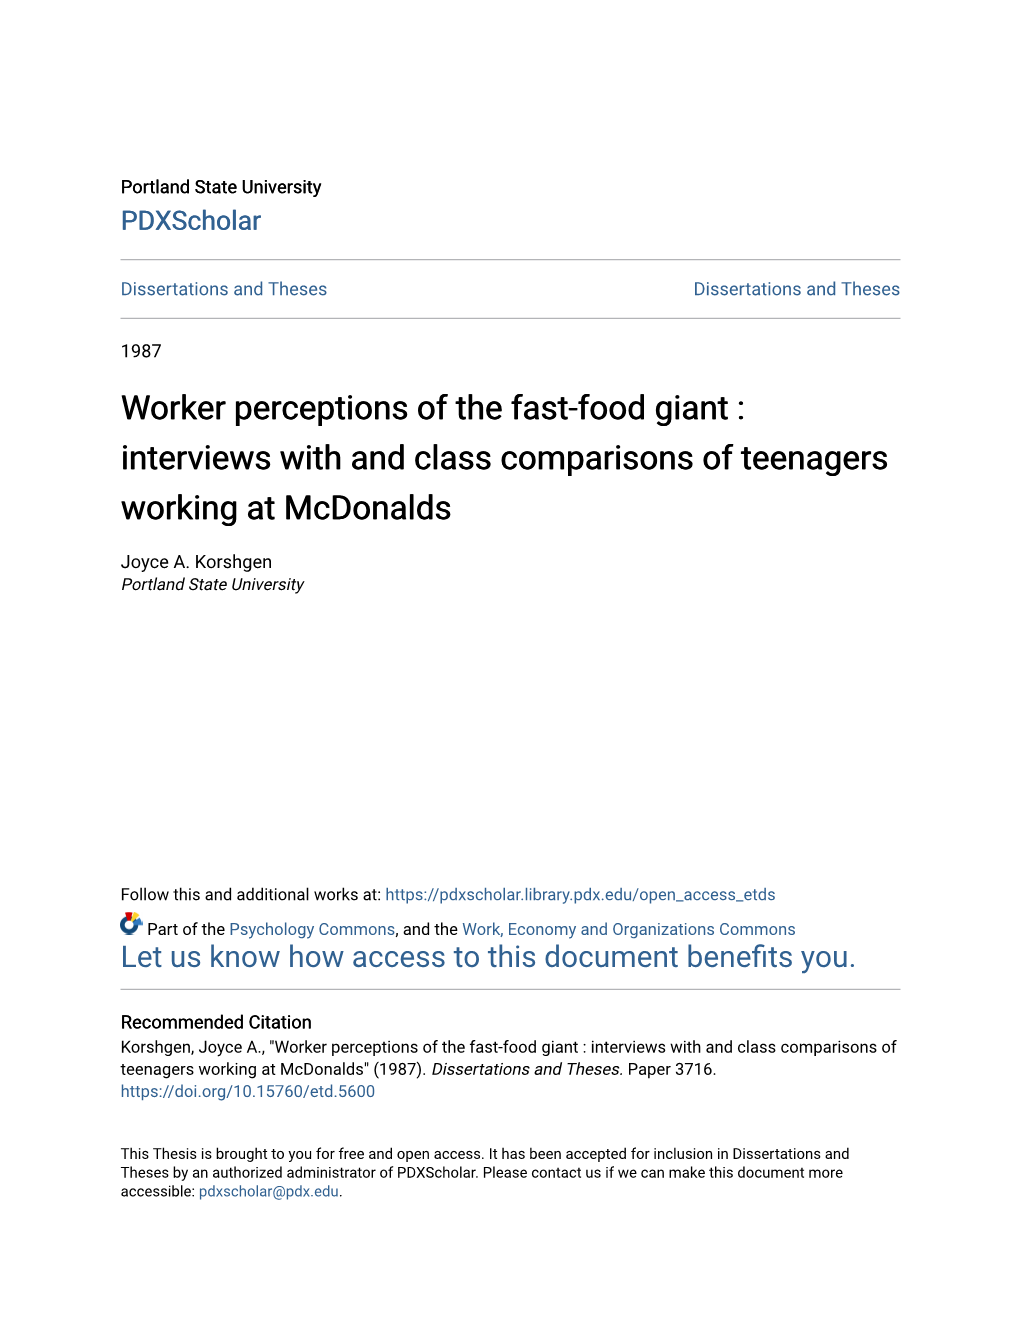 Worker Perceptions of the Fast-Food Giant : Interviews with and Class Comparisons of Teenagers Working at Mcdonalds